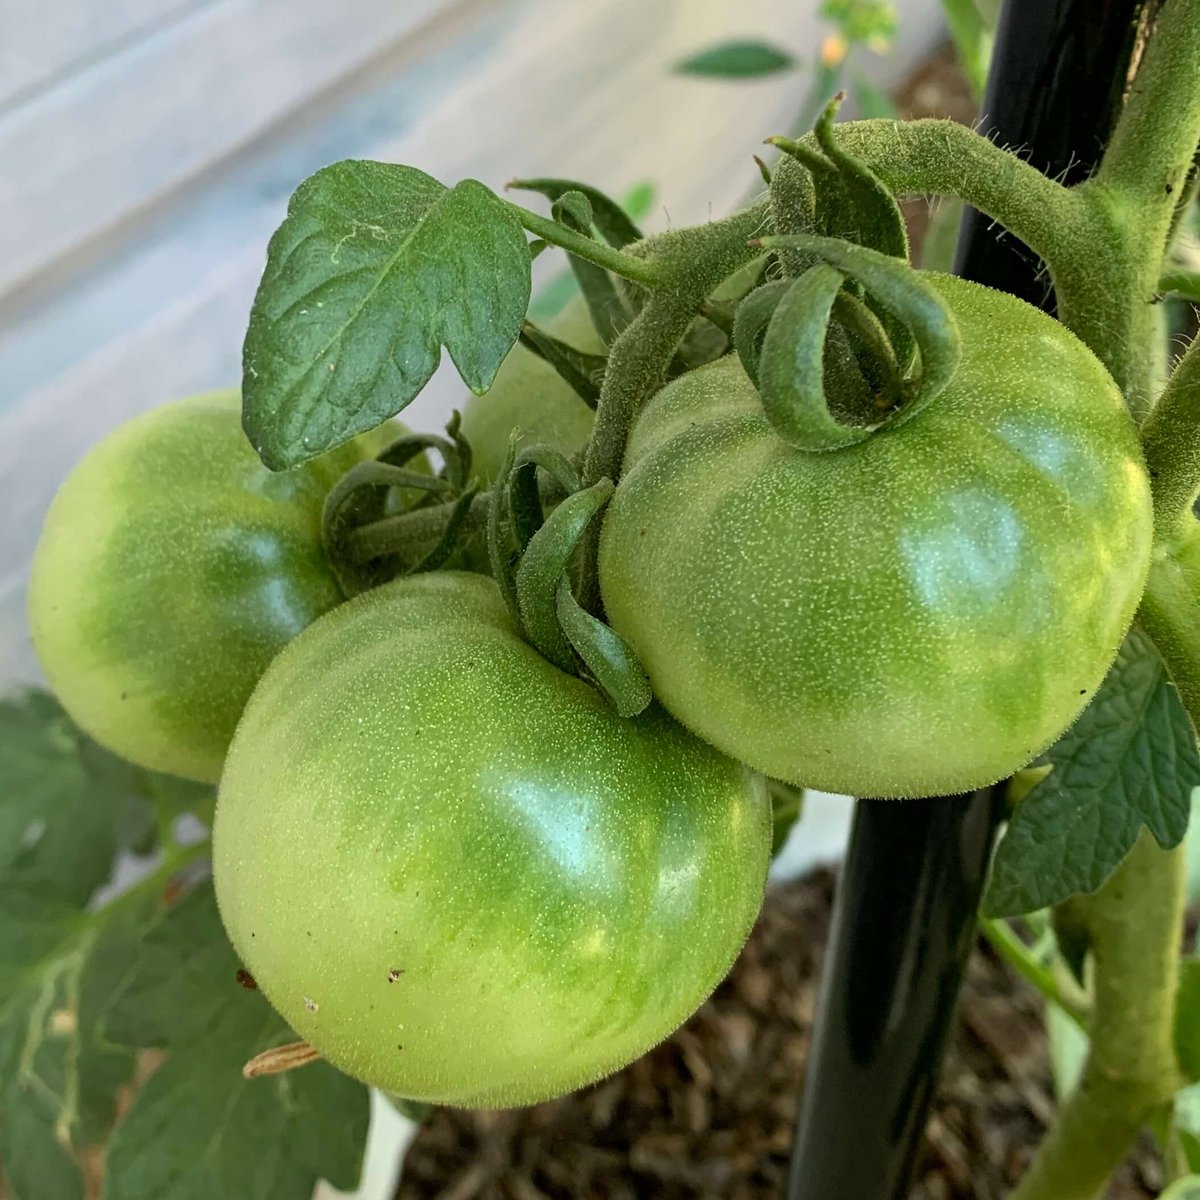 Look at the tomatoes in my garden, my darlings! Mmmm, they are gonna be so good, when they turn ripe! 🤤🪶💕

#VTuberUprising #Vtuber #writercommunity #anime #StreamerCommunity #streamer #YouTuber #twitchstreamer #GamerLife #gardening #garden #GardeningTwitter #YouTuber